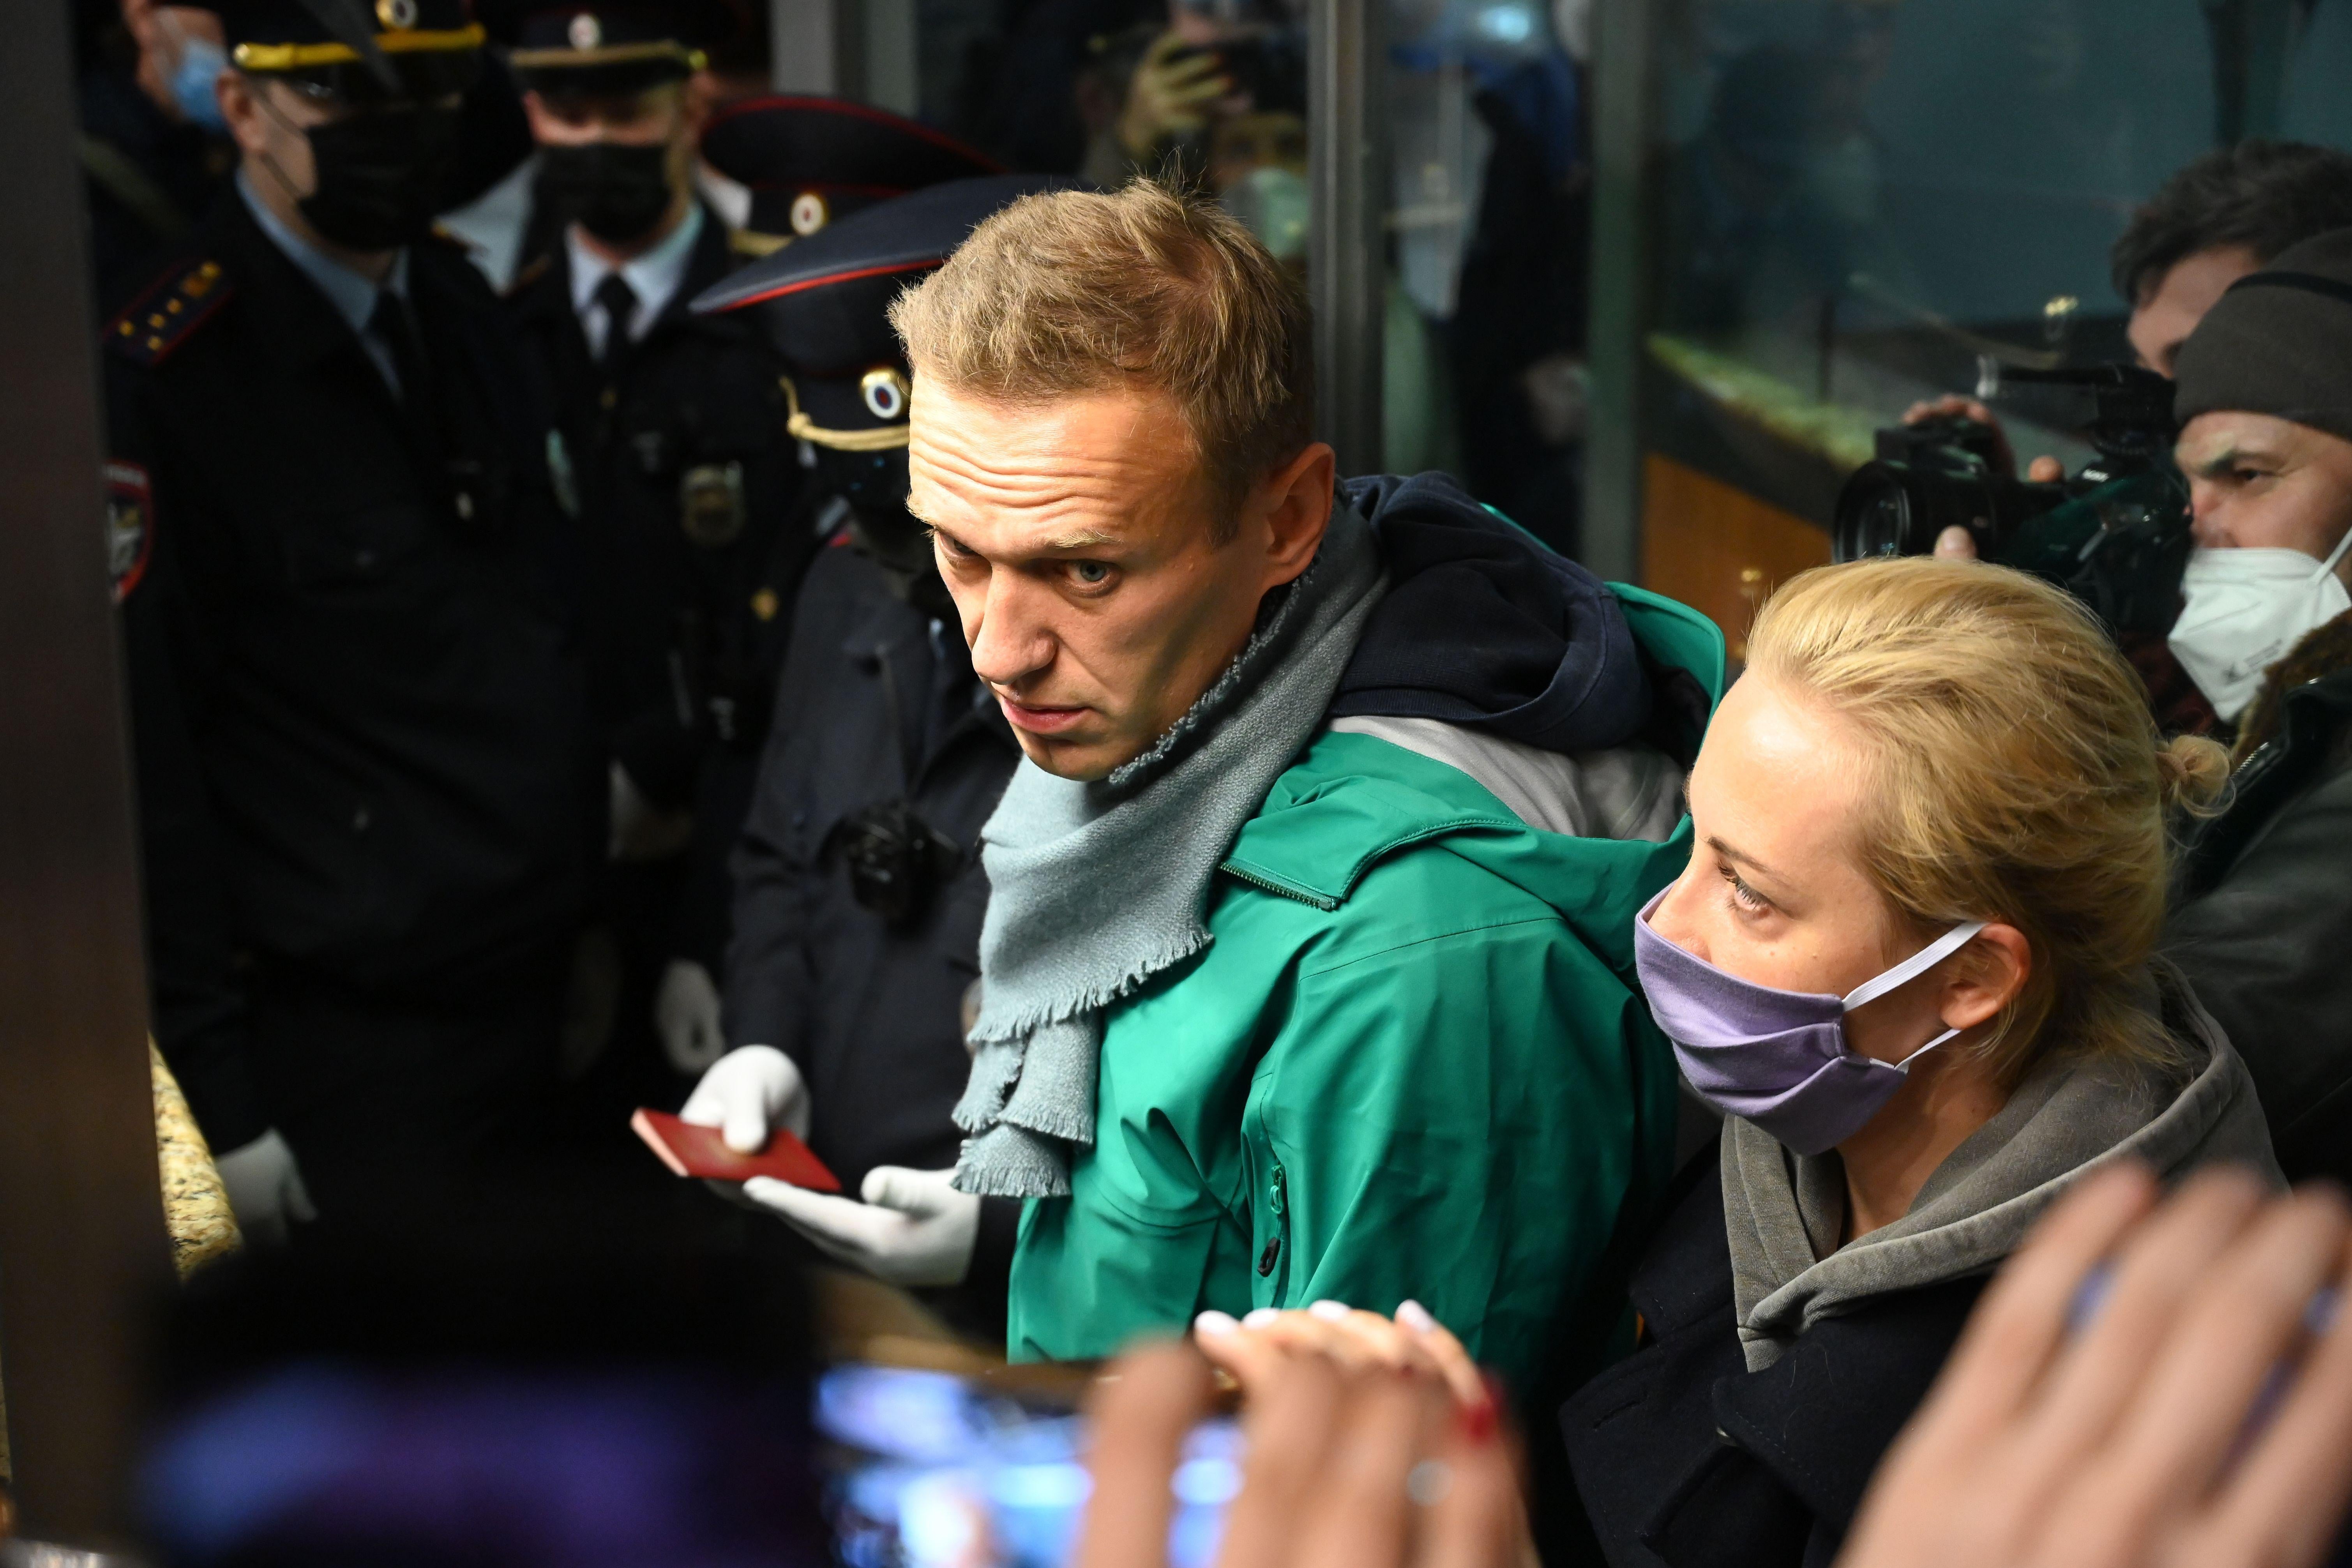 Russian opposition leader Alexei Navalny and his wife Yulia are seen at the passport control point at Moscow's Sheremetyevo airport on January 17, 2021.